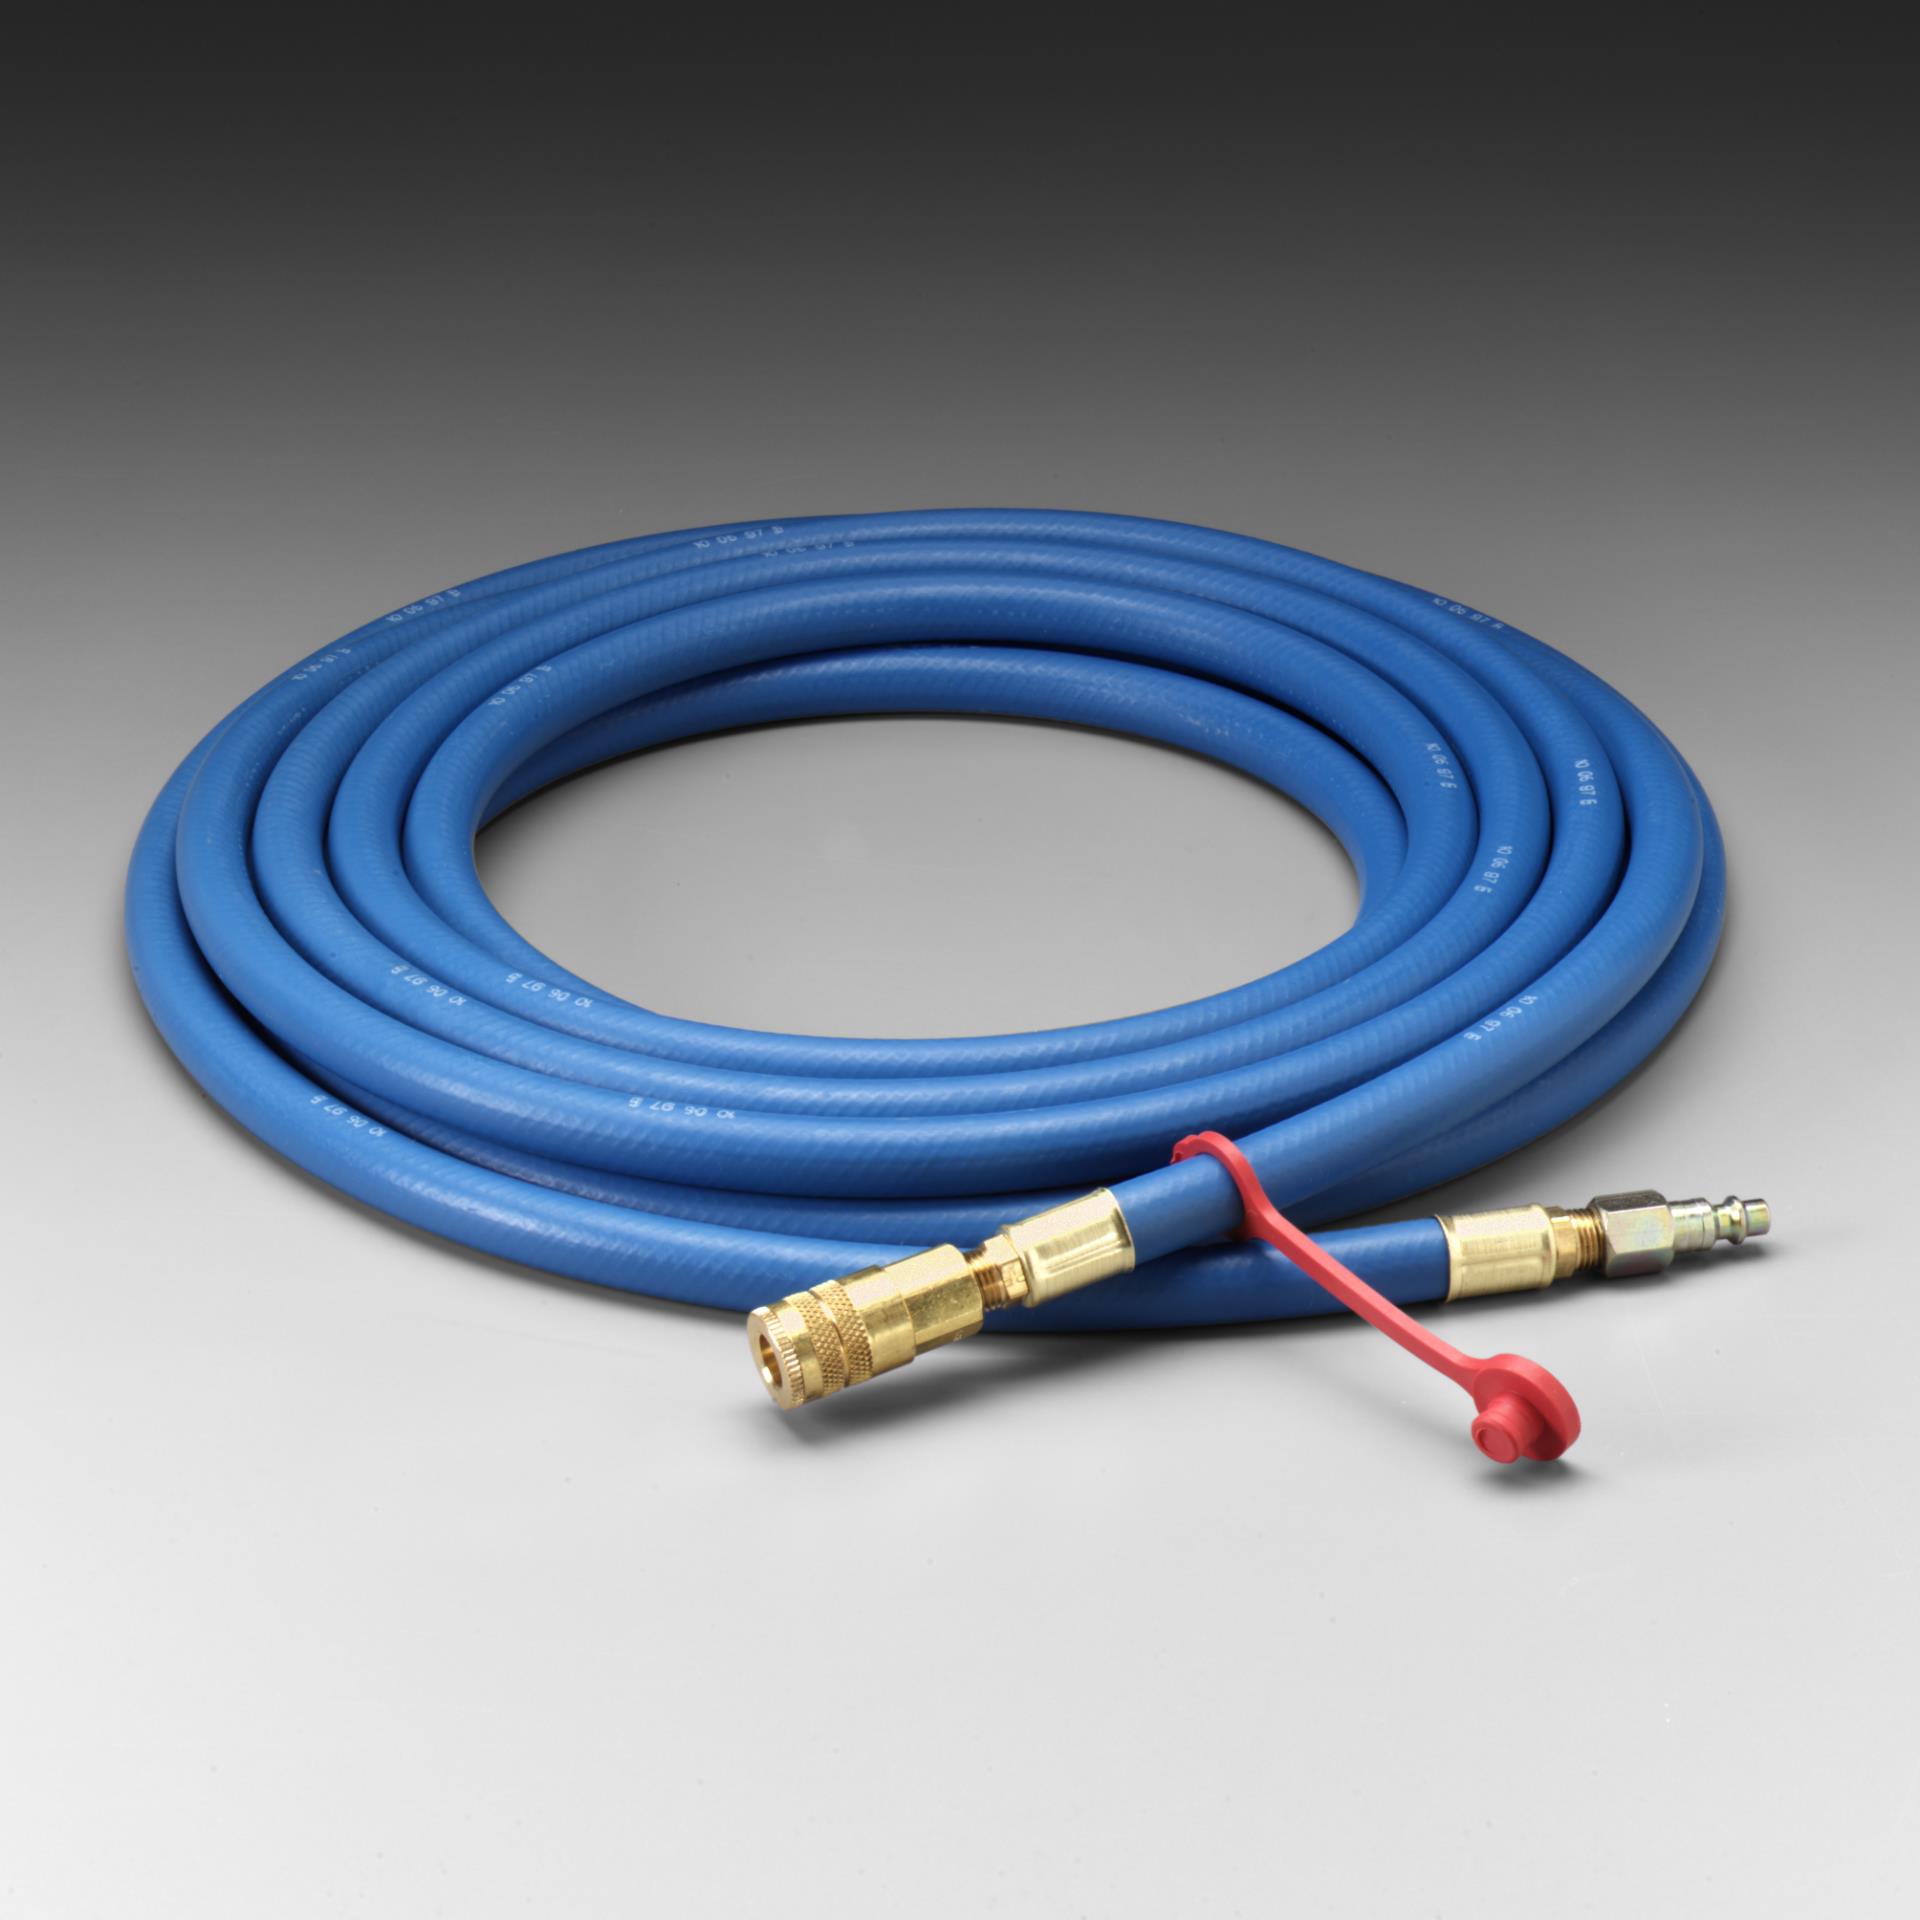 Shower hose 1,60 m x 1,27cm with both sides Rotary cone 1/2 